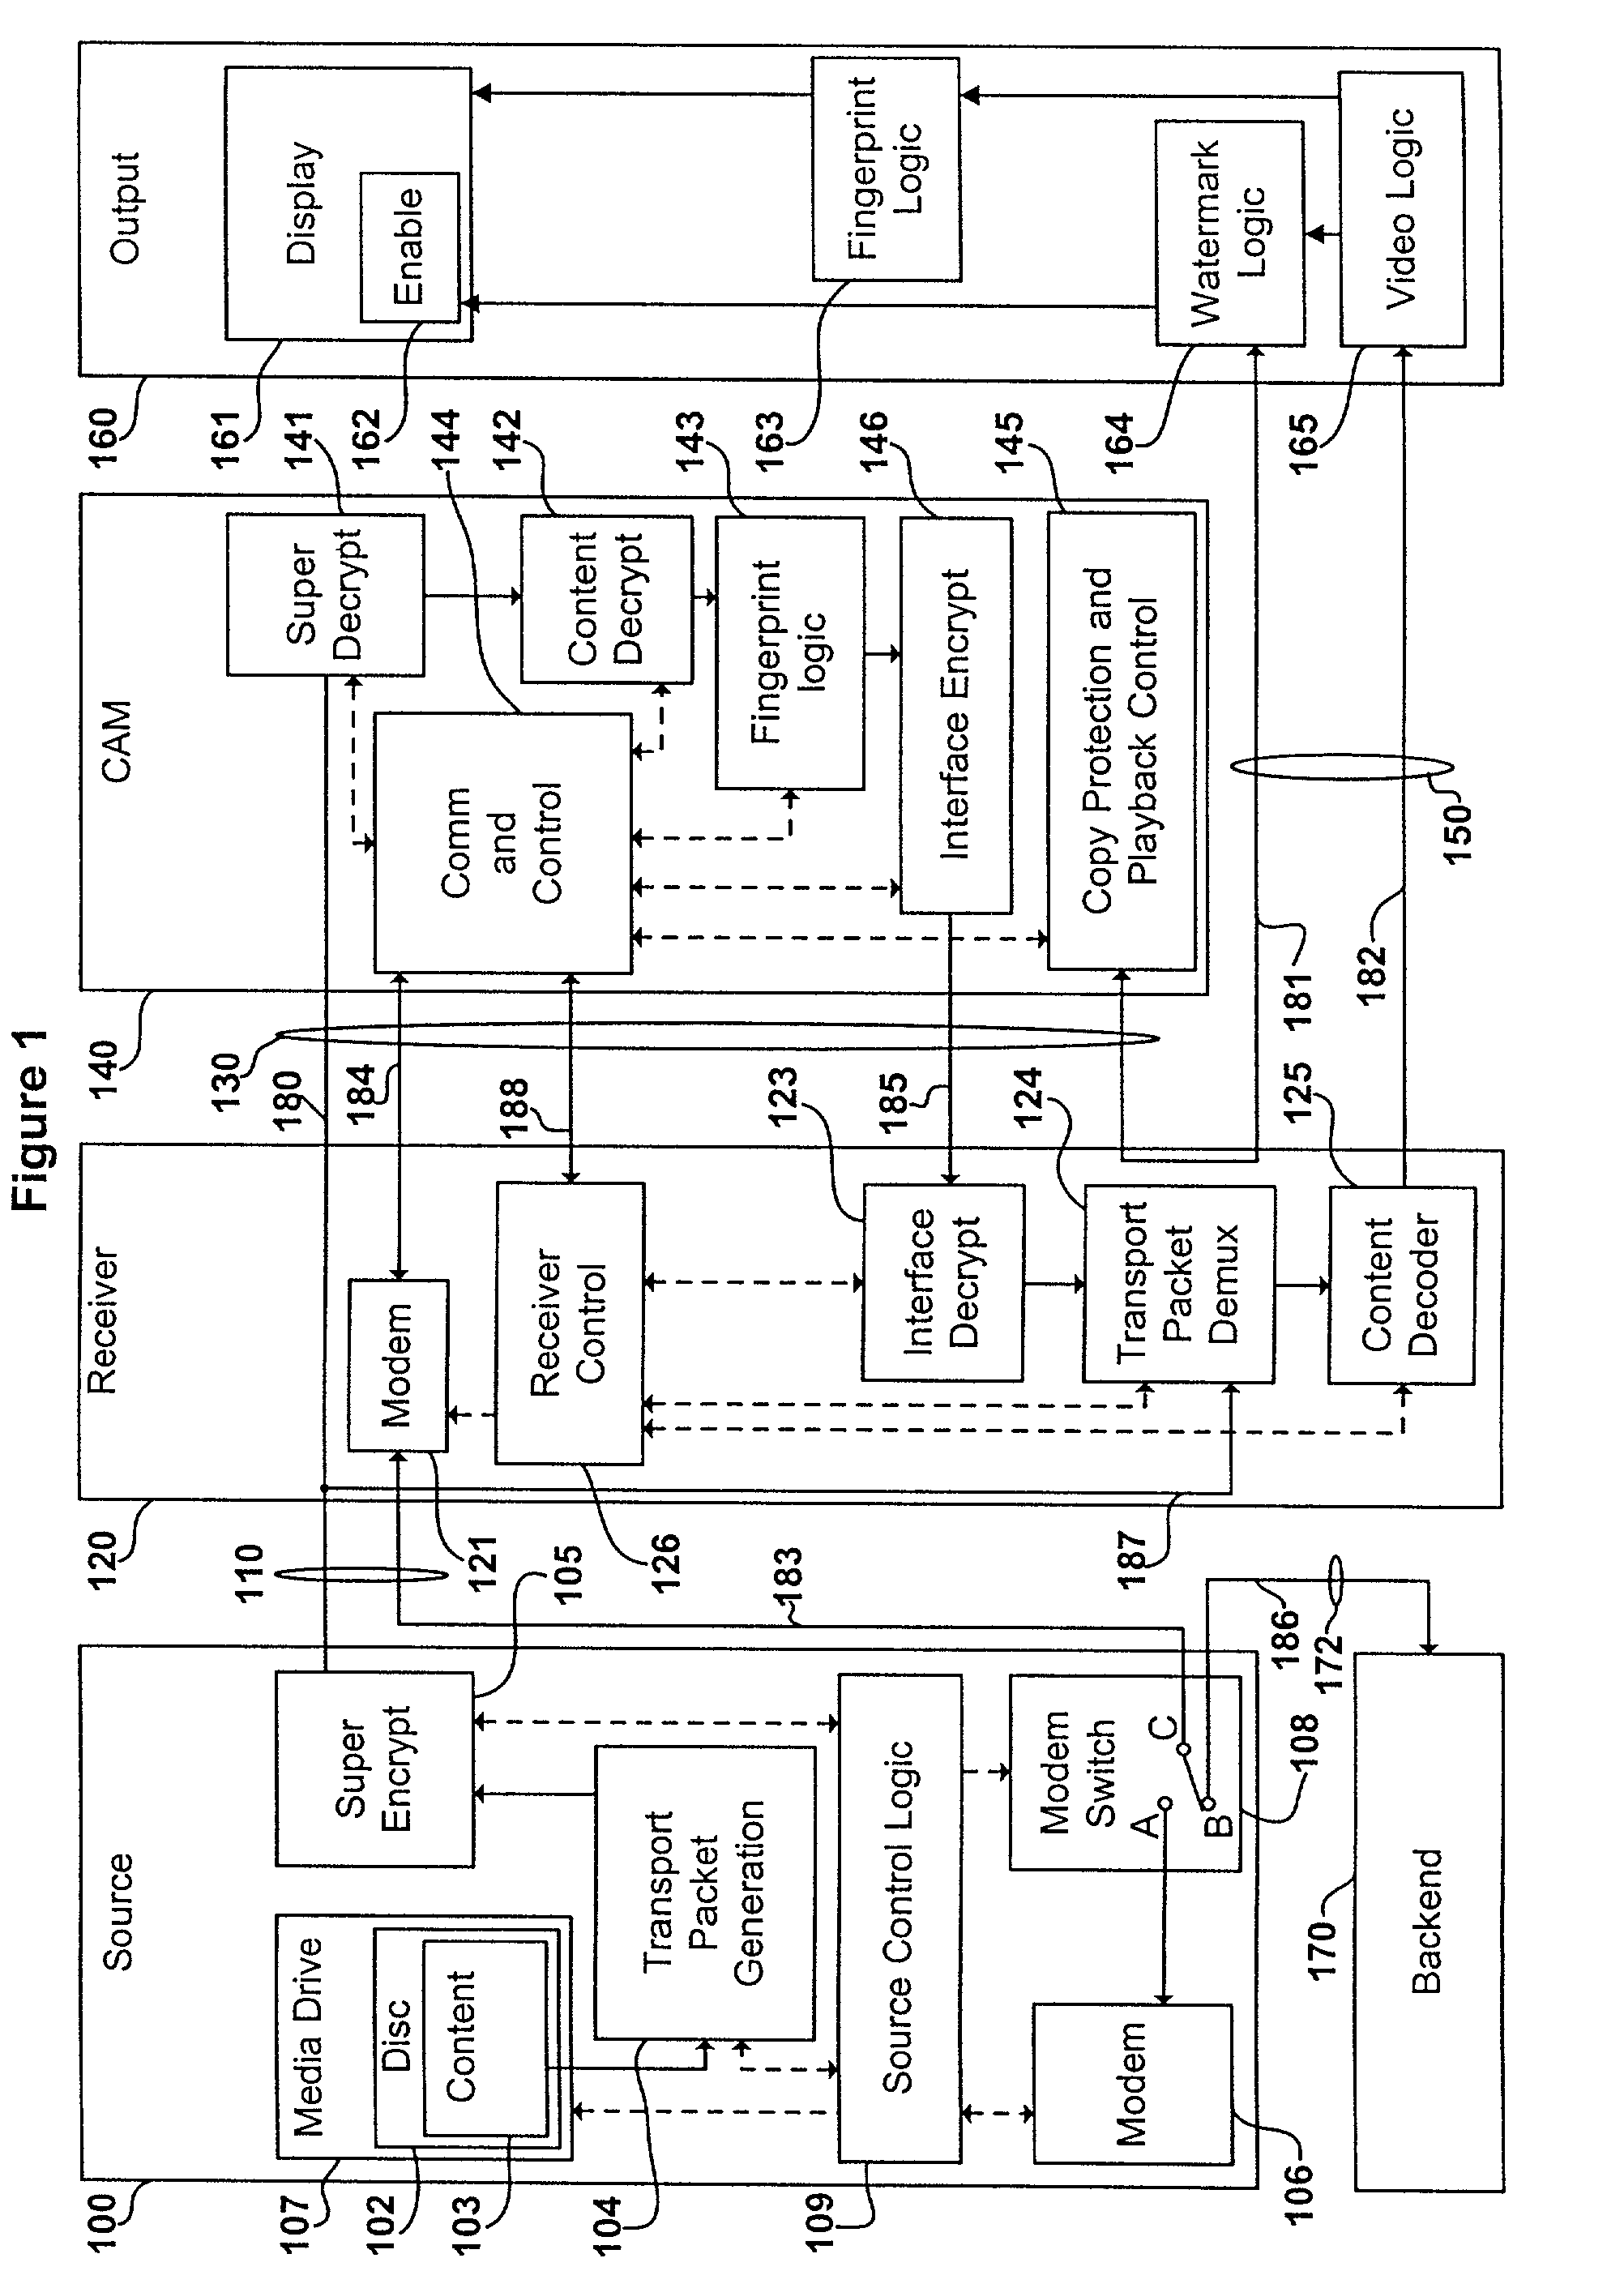 Digital content distribution system and method